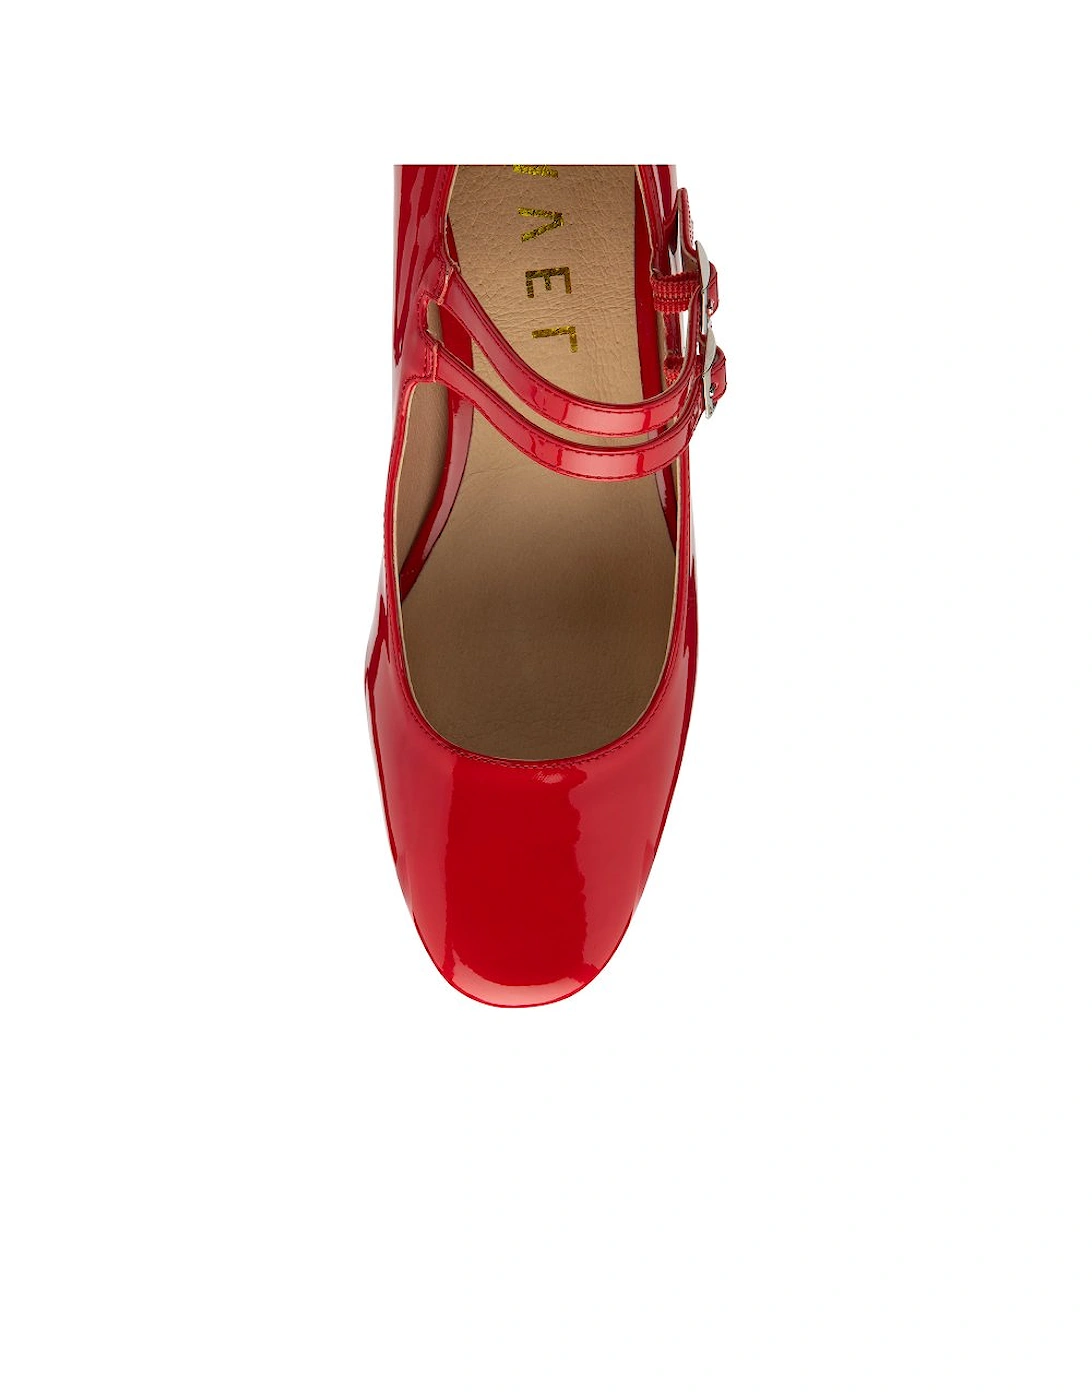 Howth Womens Mary Jane Shoes